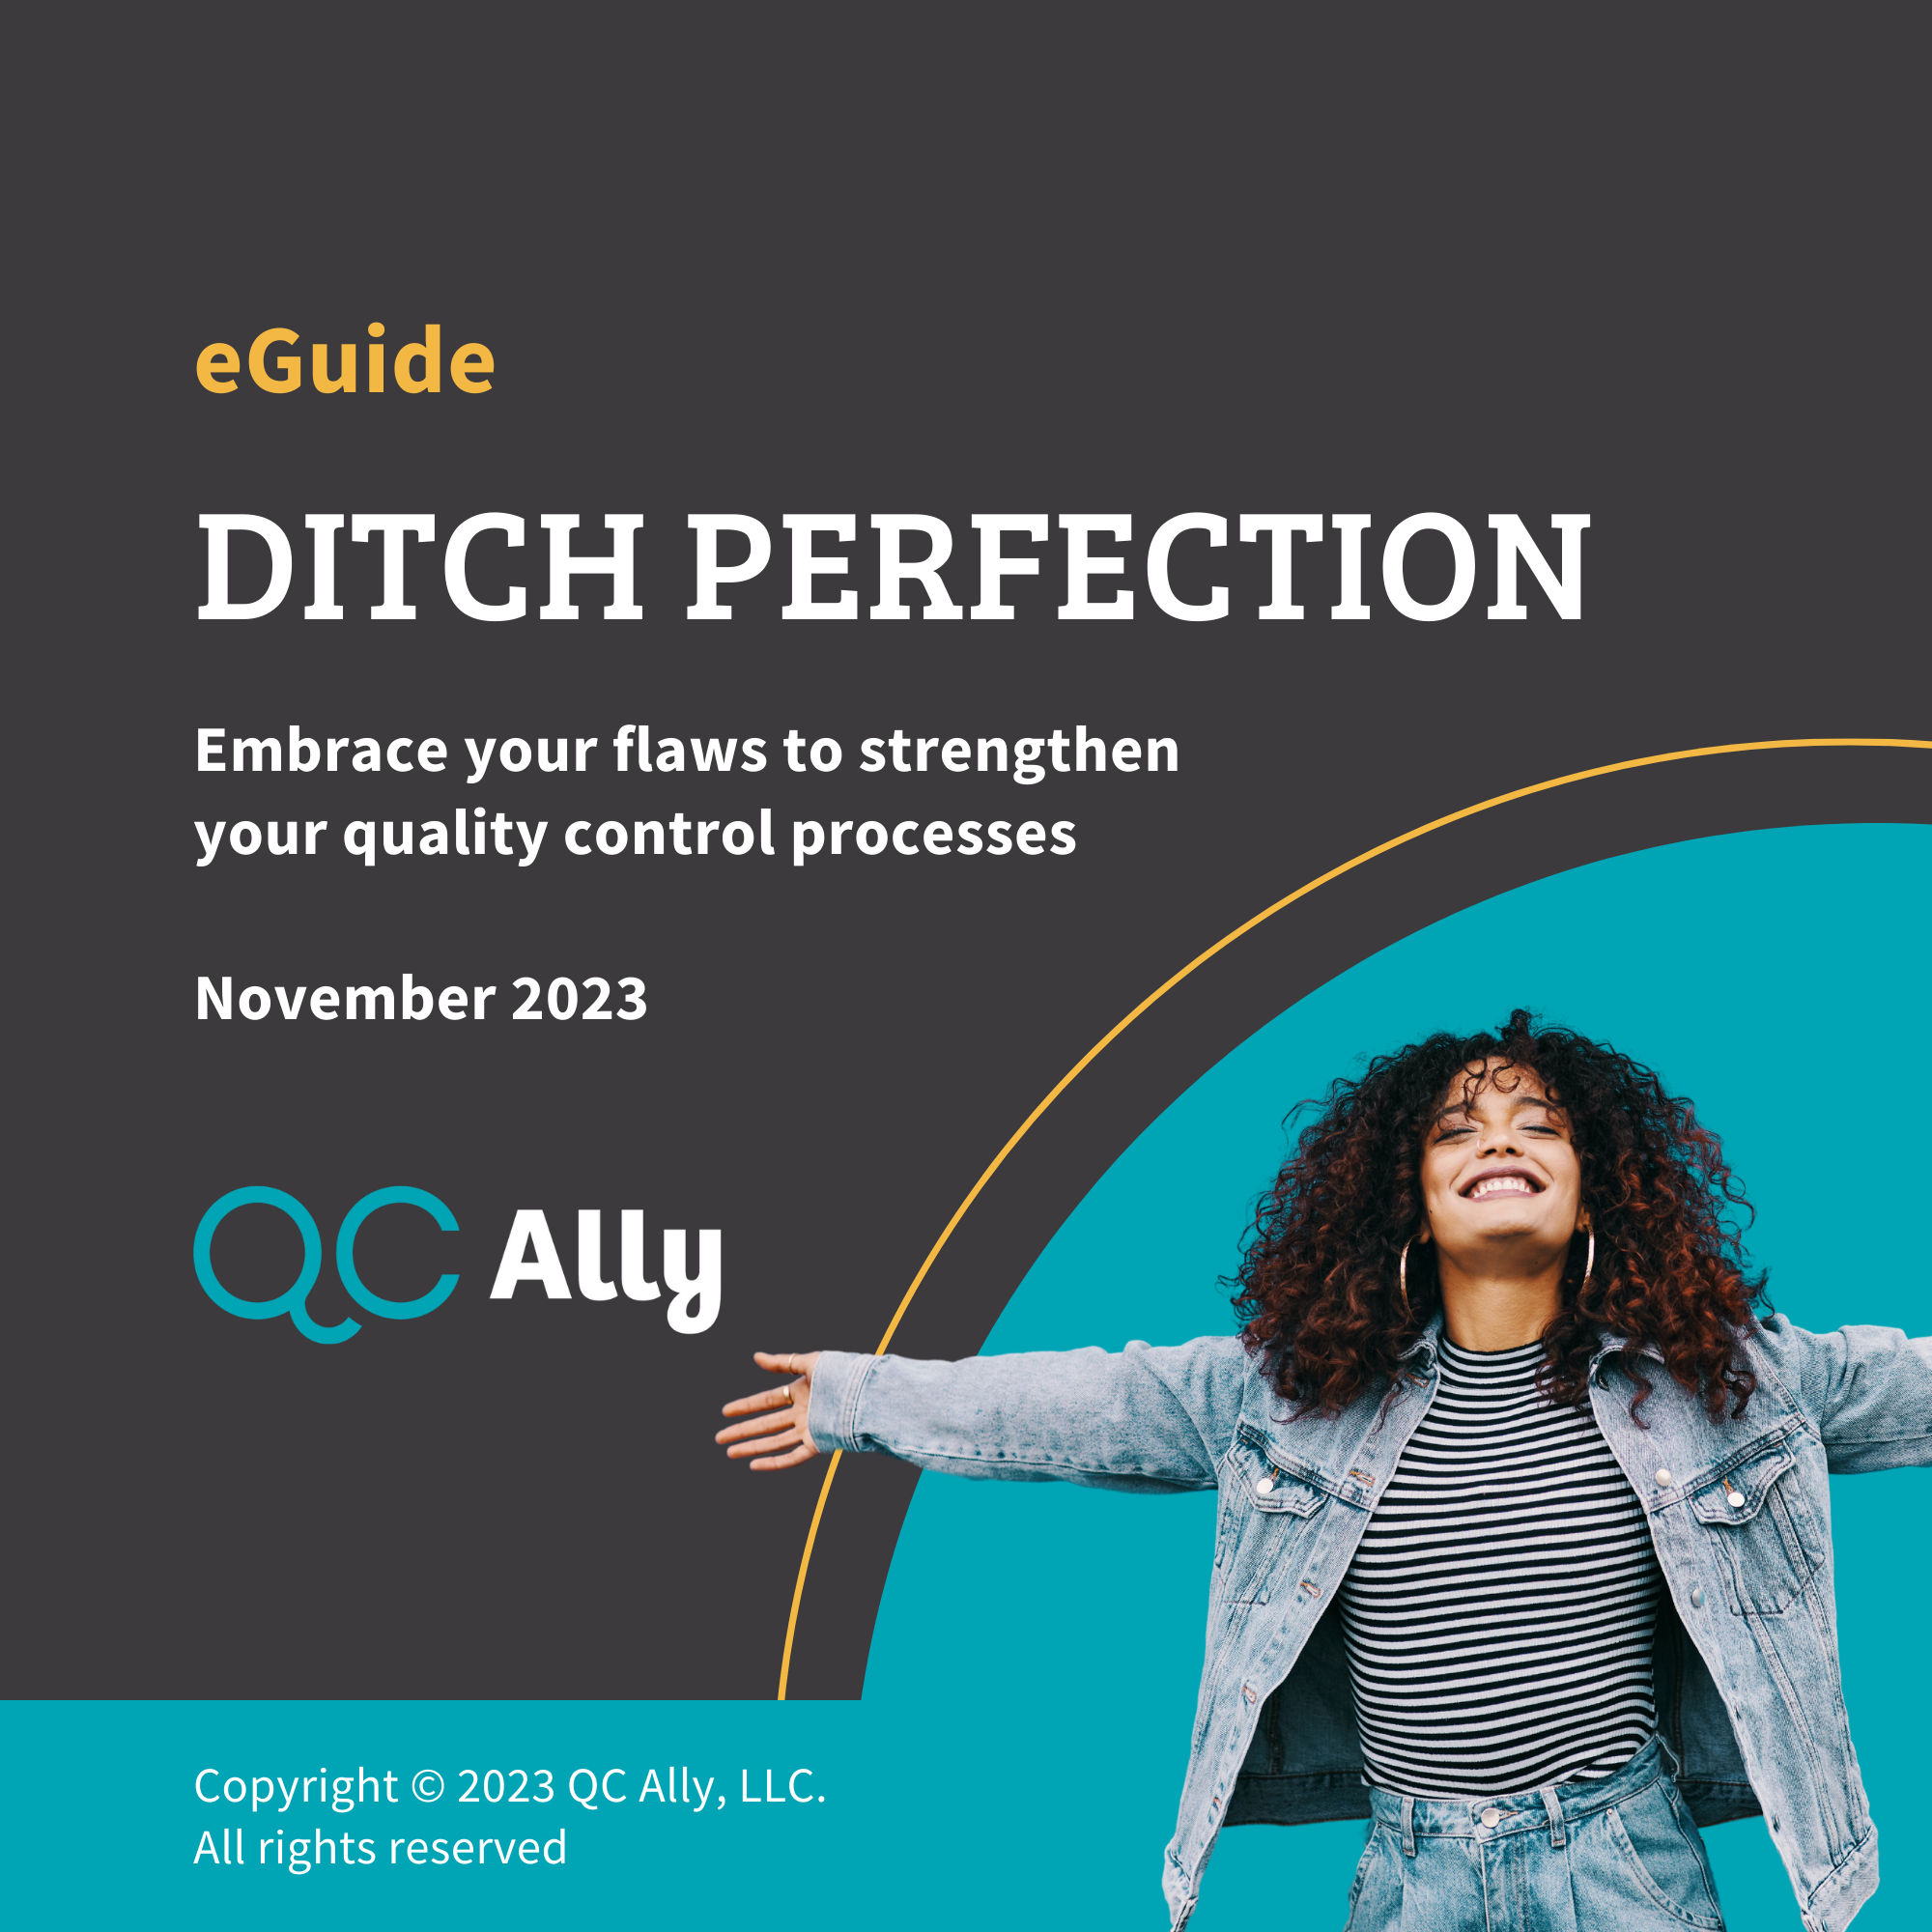 eGuide: Embrace your flaws to strengthen your QC processes